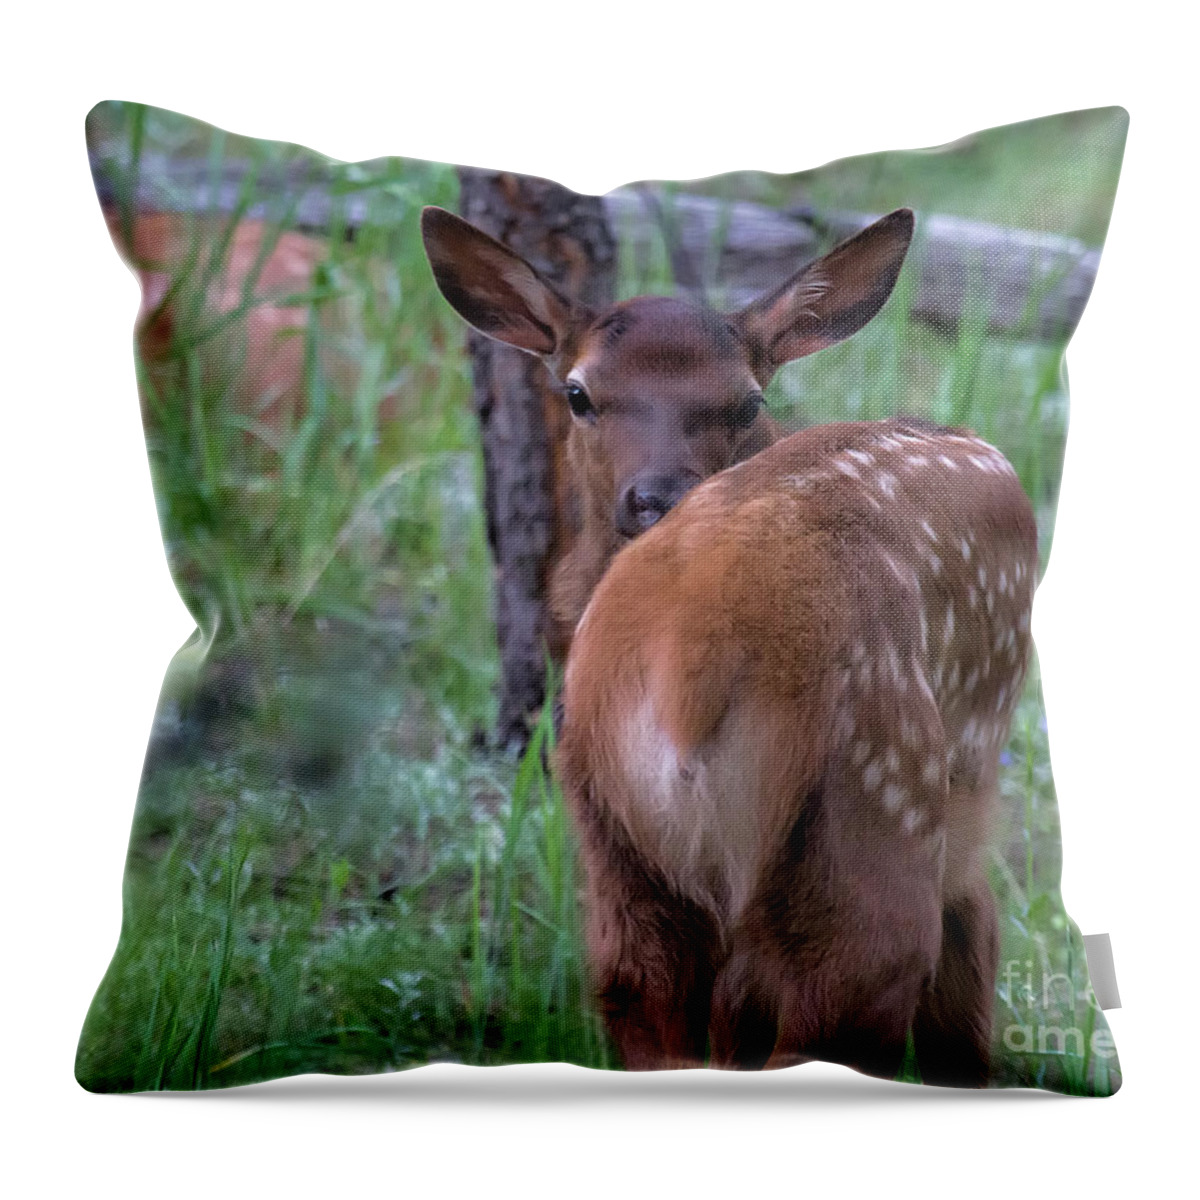 Baby Elk Throw Pillow featuring the photograph Rubber Necking by Jim Garrison